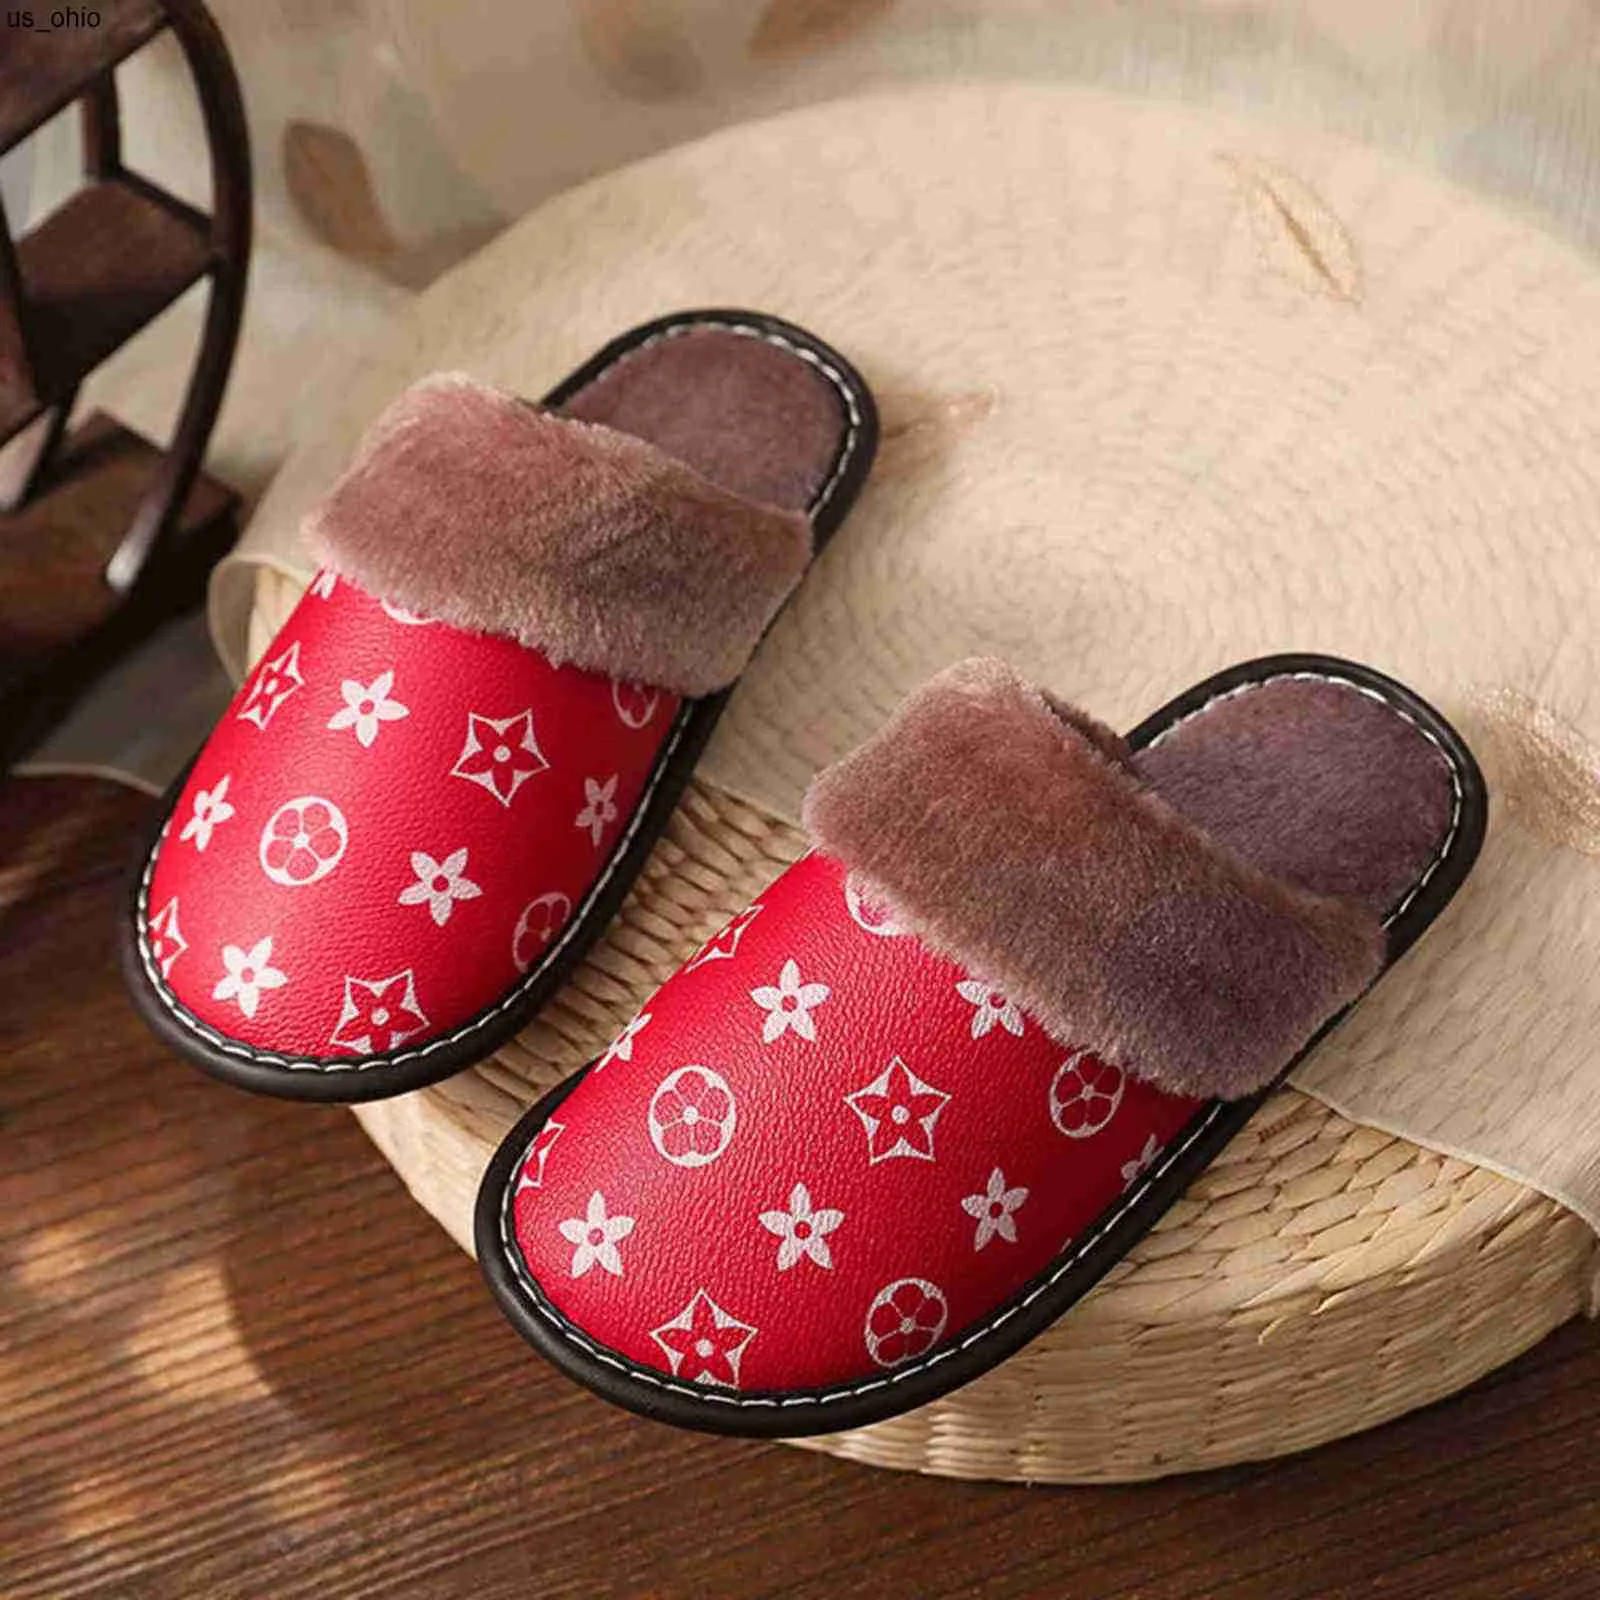 Cozy Unisex Printed Plush Cotton Fur Lined Slippers For Indoor And Outdoor  Use Winter Warm Flip Flops H1115 From Shihui5888, $11.47 | DHgate.Com